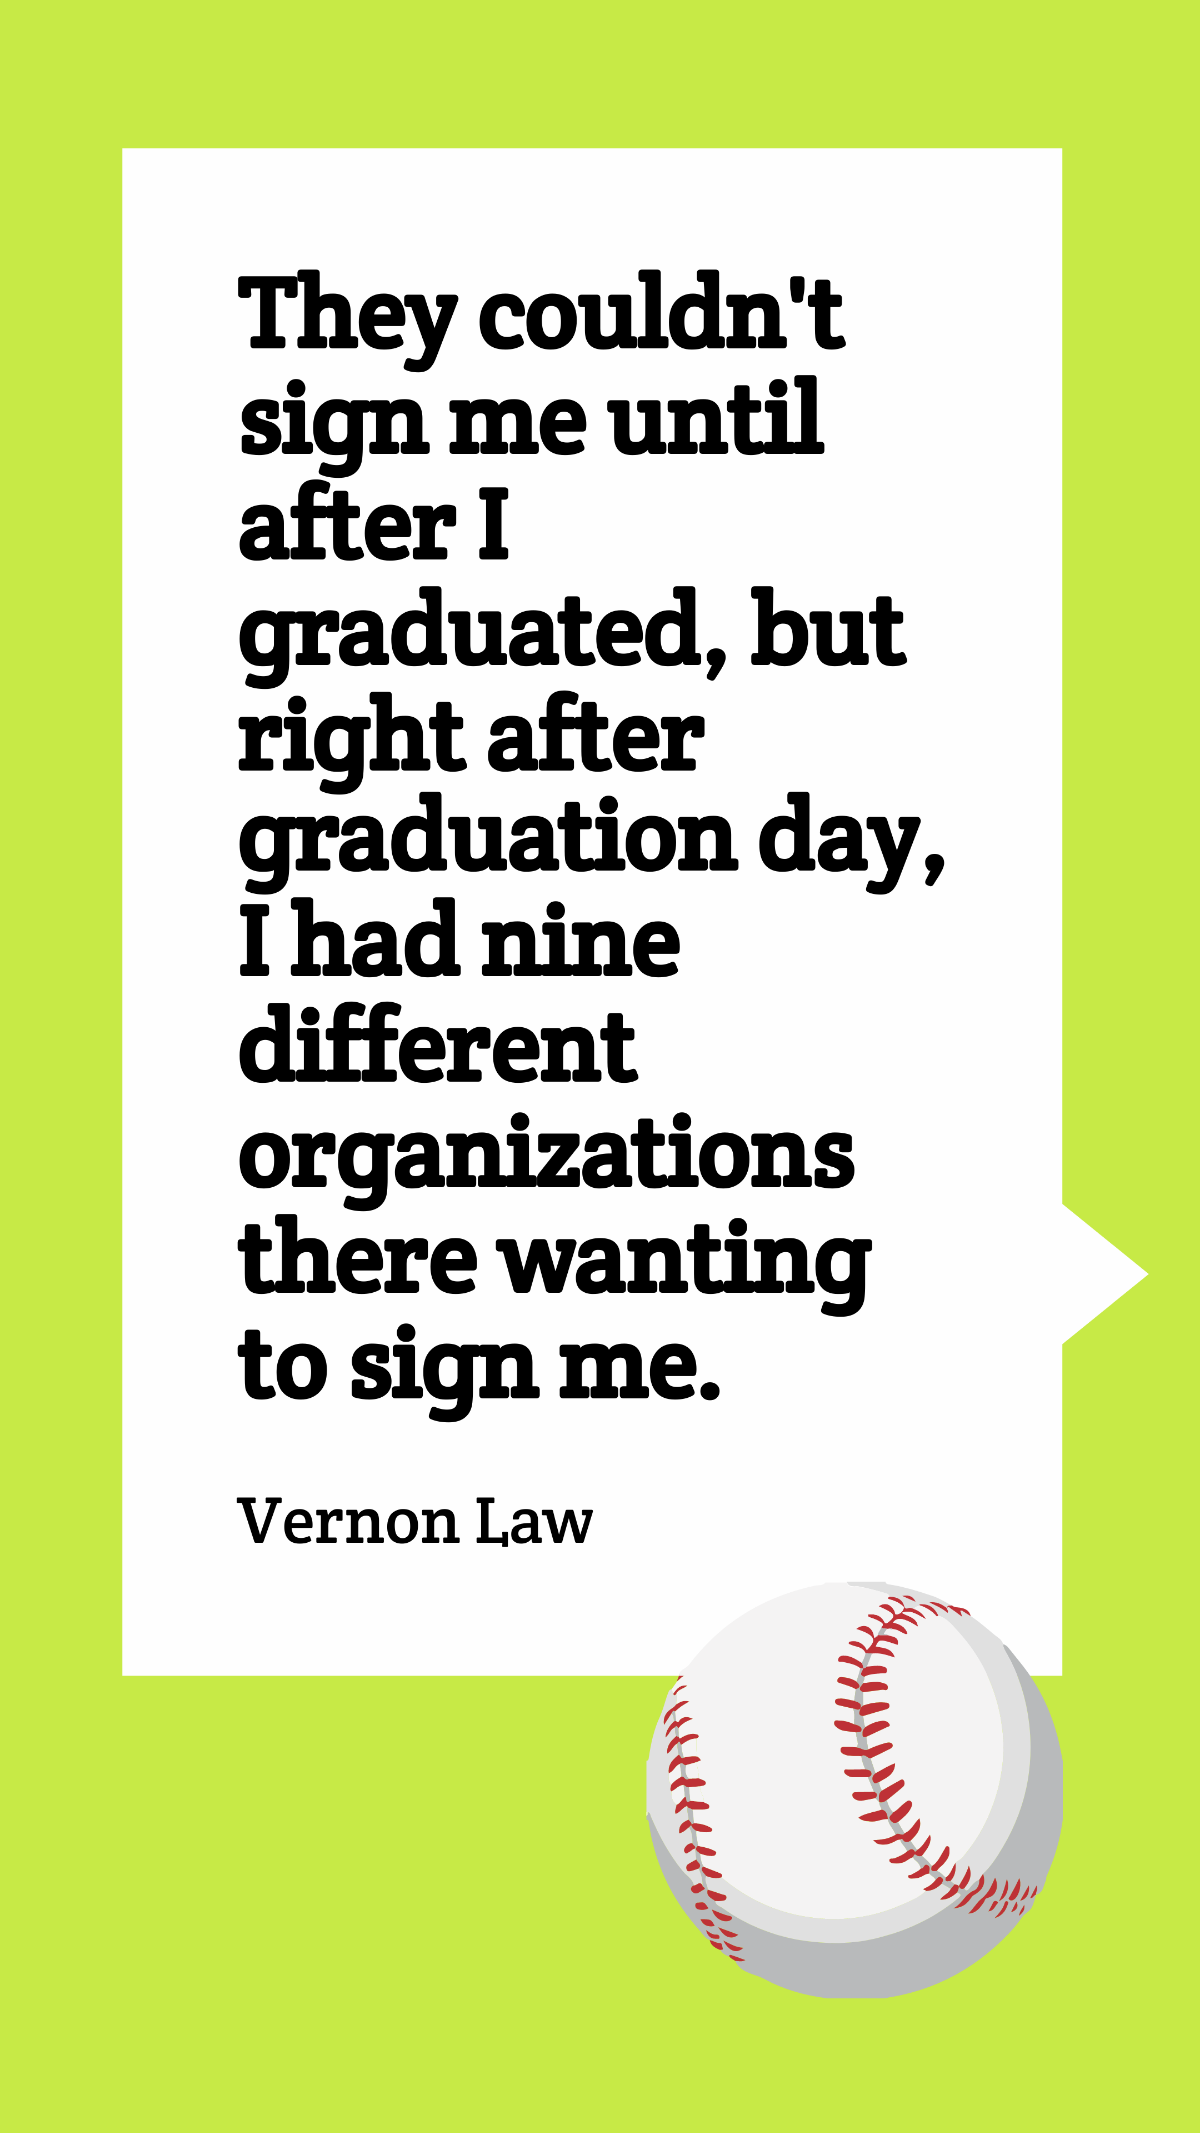 Free Vernon Law - They couldn't sign me until after I graduated, but right after graduation day, I had nine different organizations there wanting to sign me. Template